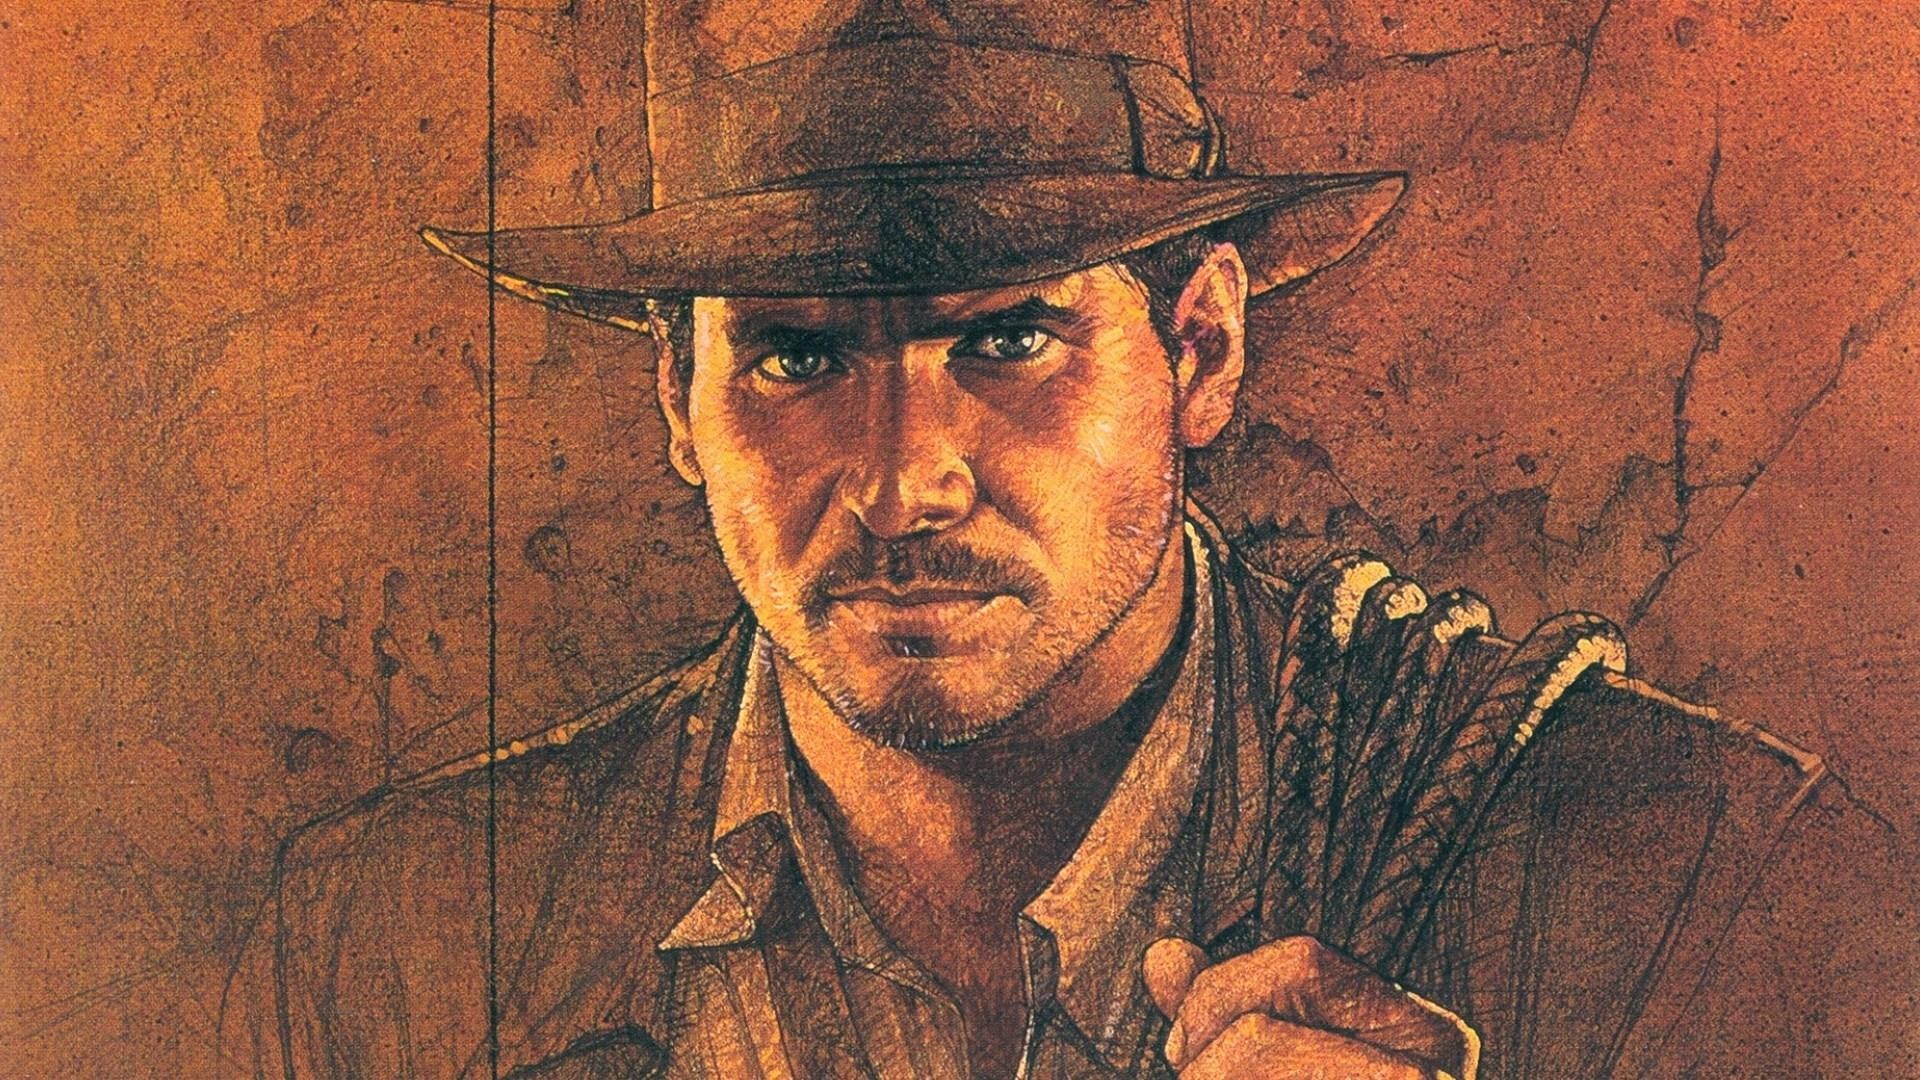 General 1920x1080 movies Indiana Jones Harrison Ford Indiana Jones and the Raiders of the Lost Ark George Lucas Steven Spielberg